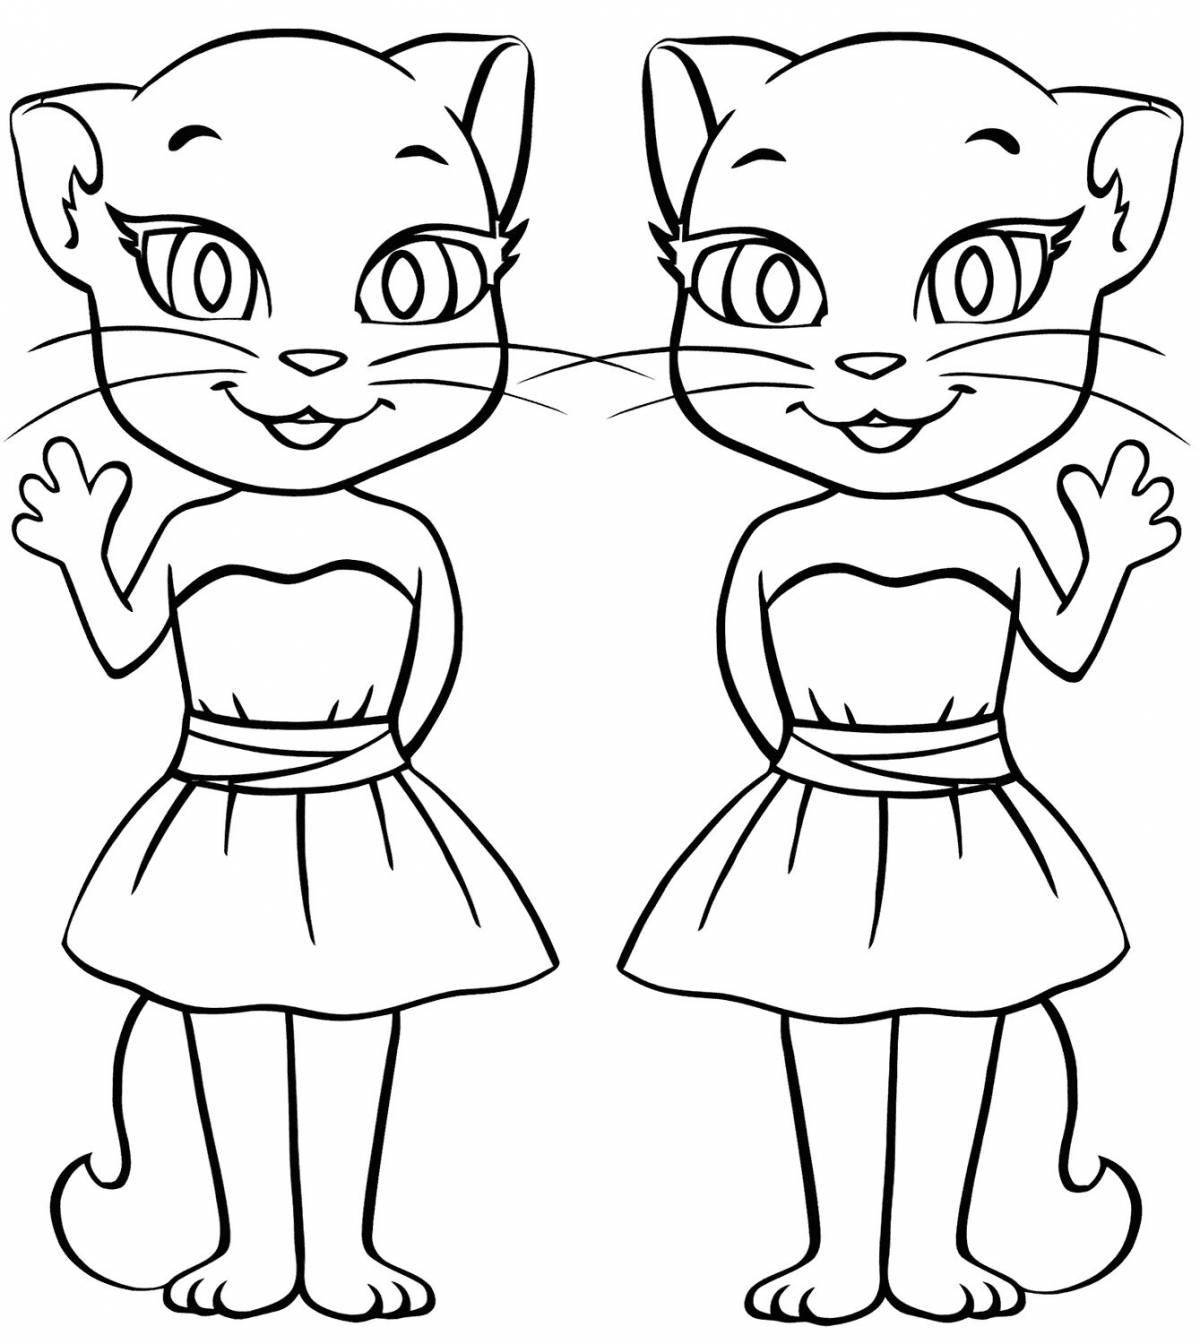 Angela kitty's amazing coloring page